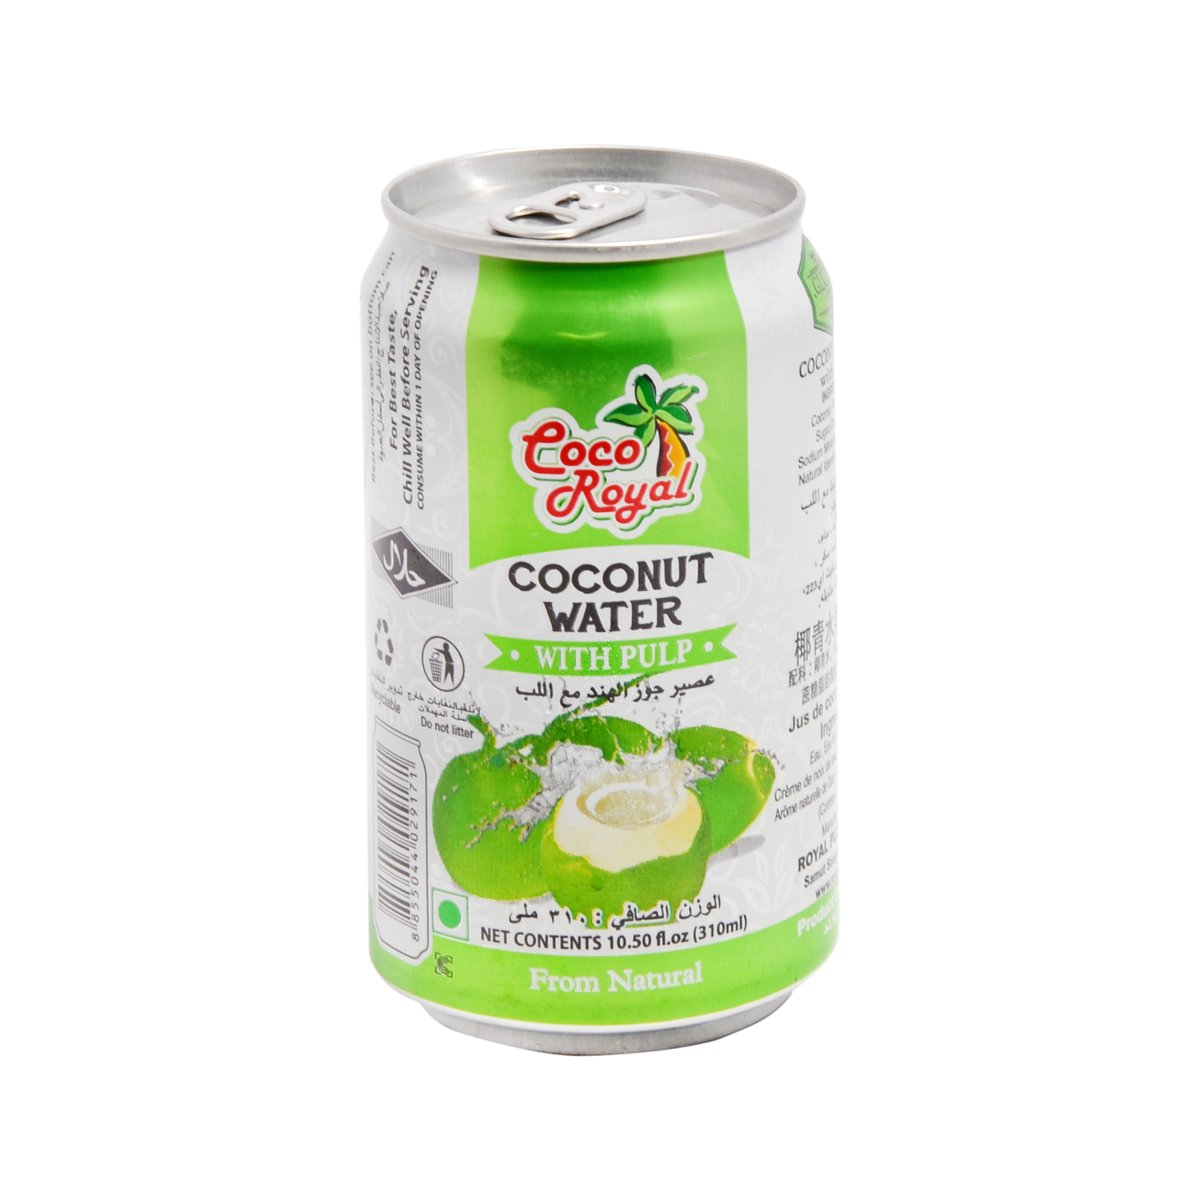 Coco Royal Coconut Water with Pulp 310ml